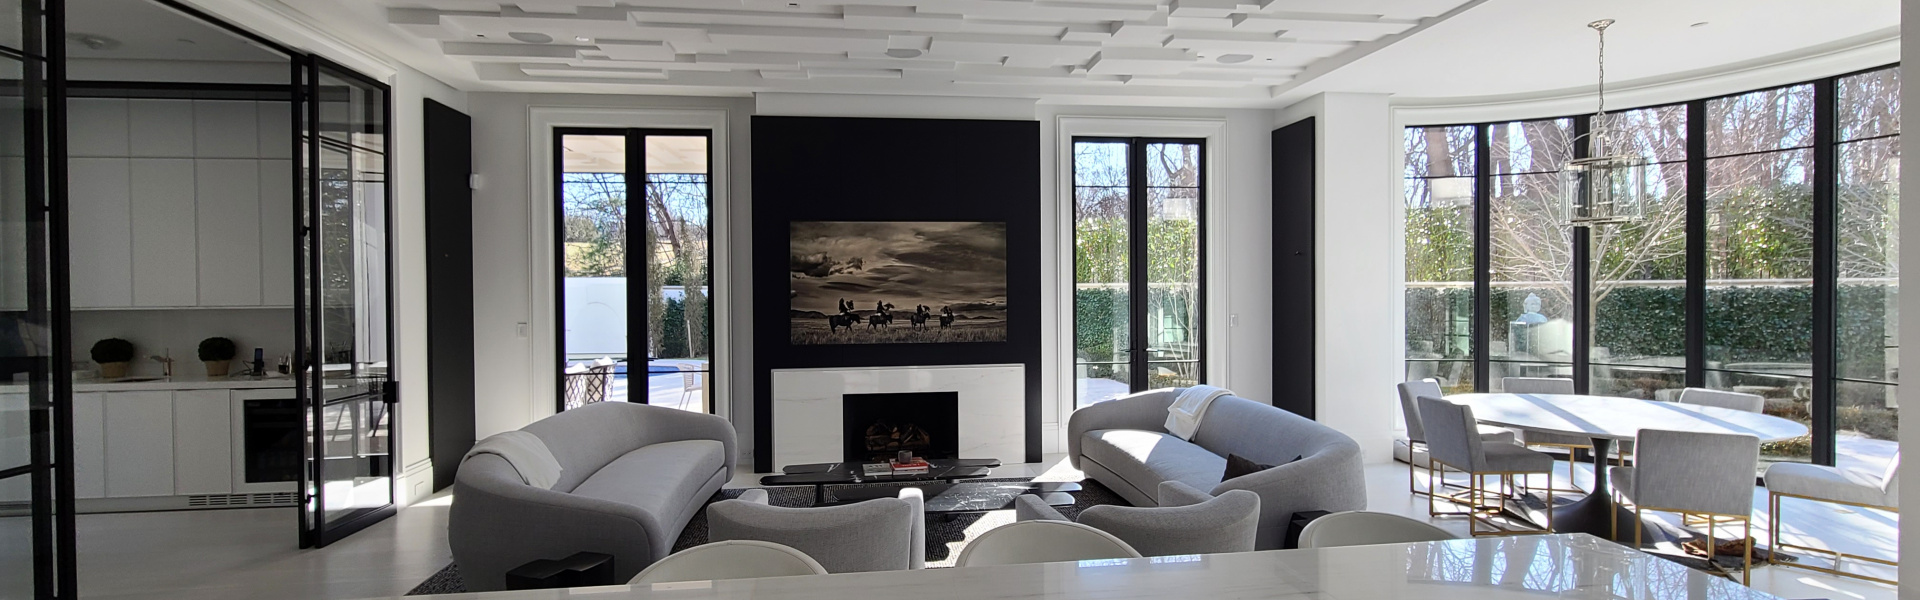 Smart home installation by Innovative Audio and Video for McLean